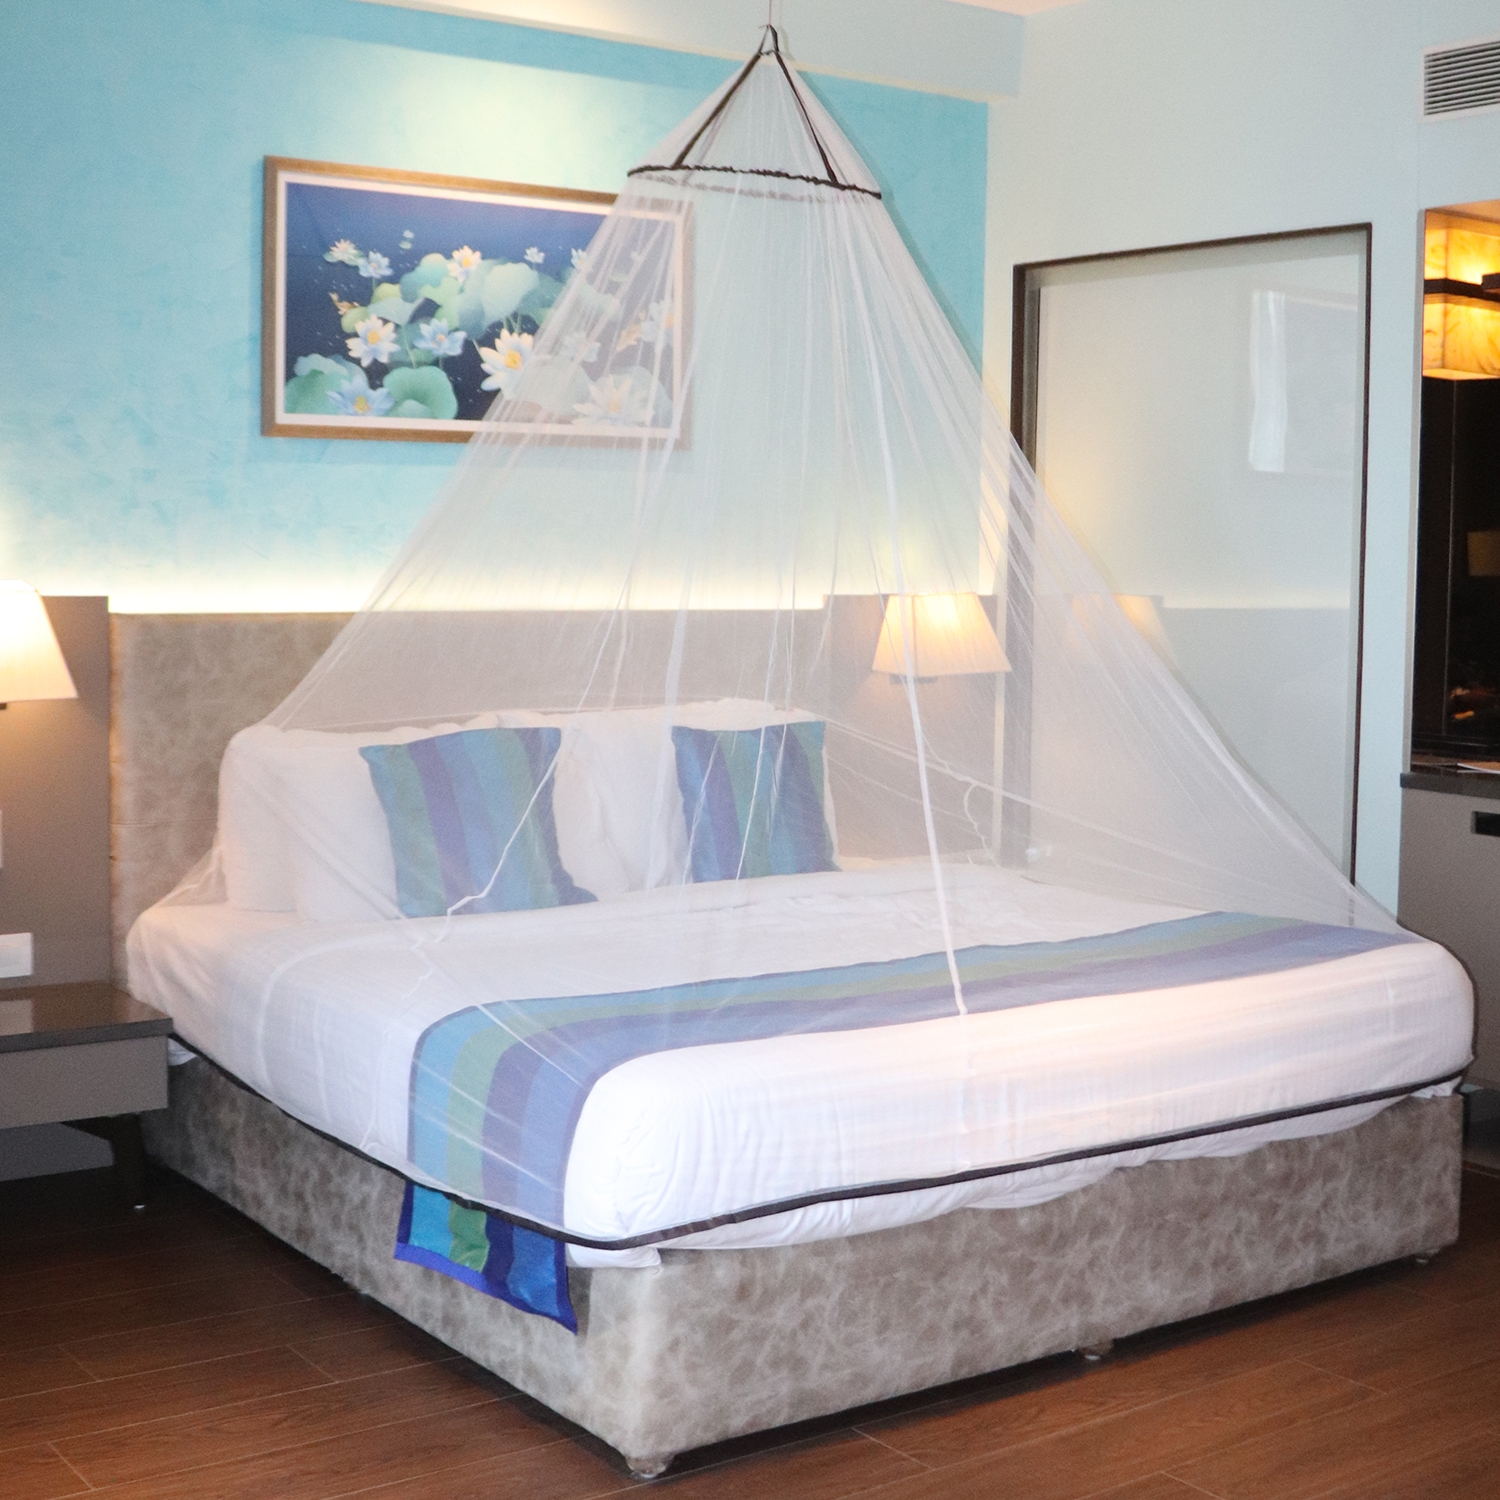 SILVER SHINE | Mosquito Net for Double Bed, King-Size, Round Ceiling Hanging Foldable Polyester Net White And Brown 4